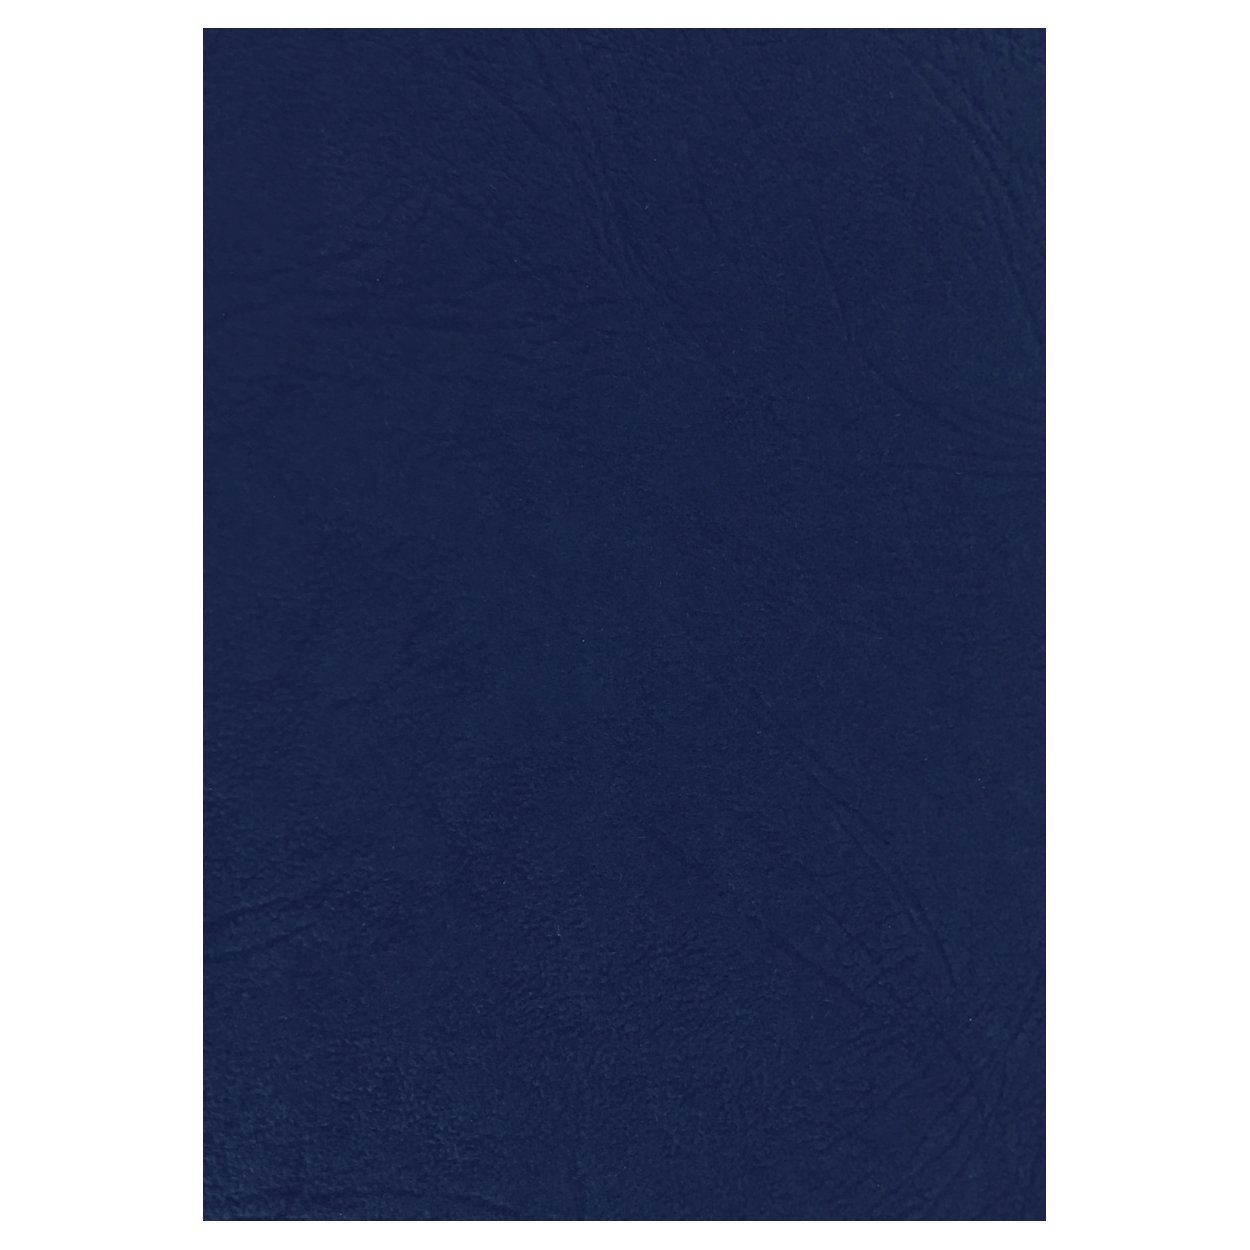 A5 Leathergrain Binding Covers 250gsm - Royal Blue (Pkt 100) - Click Image to Close